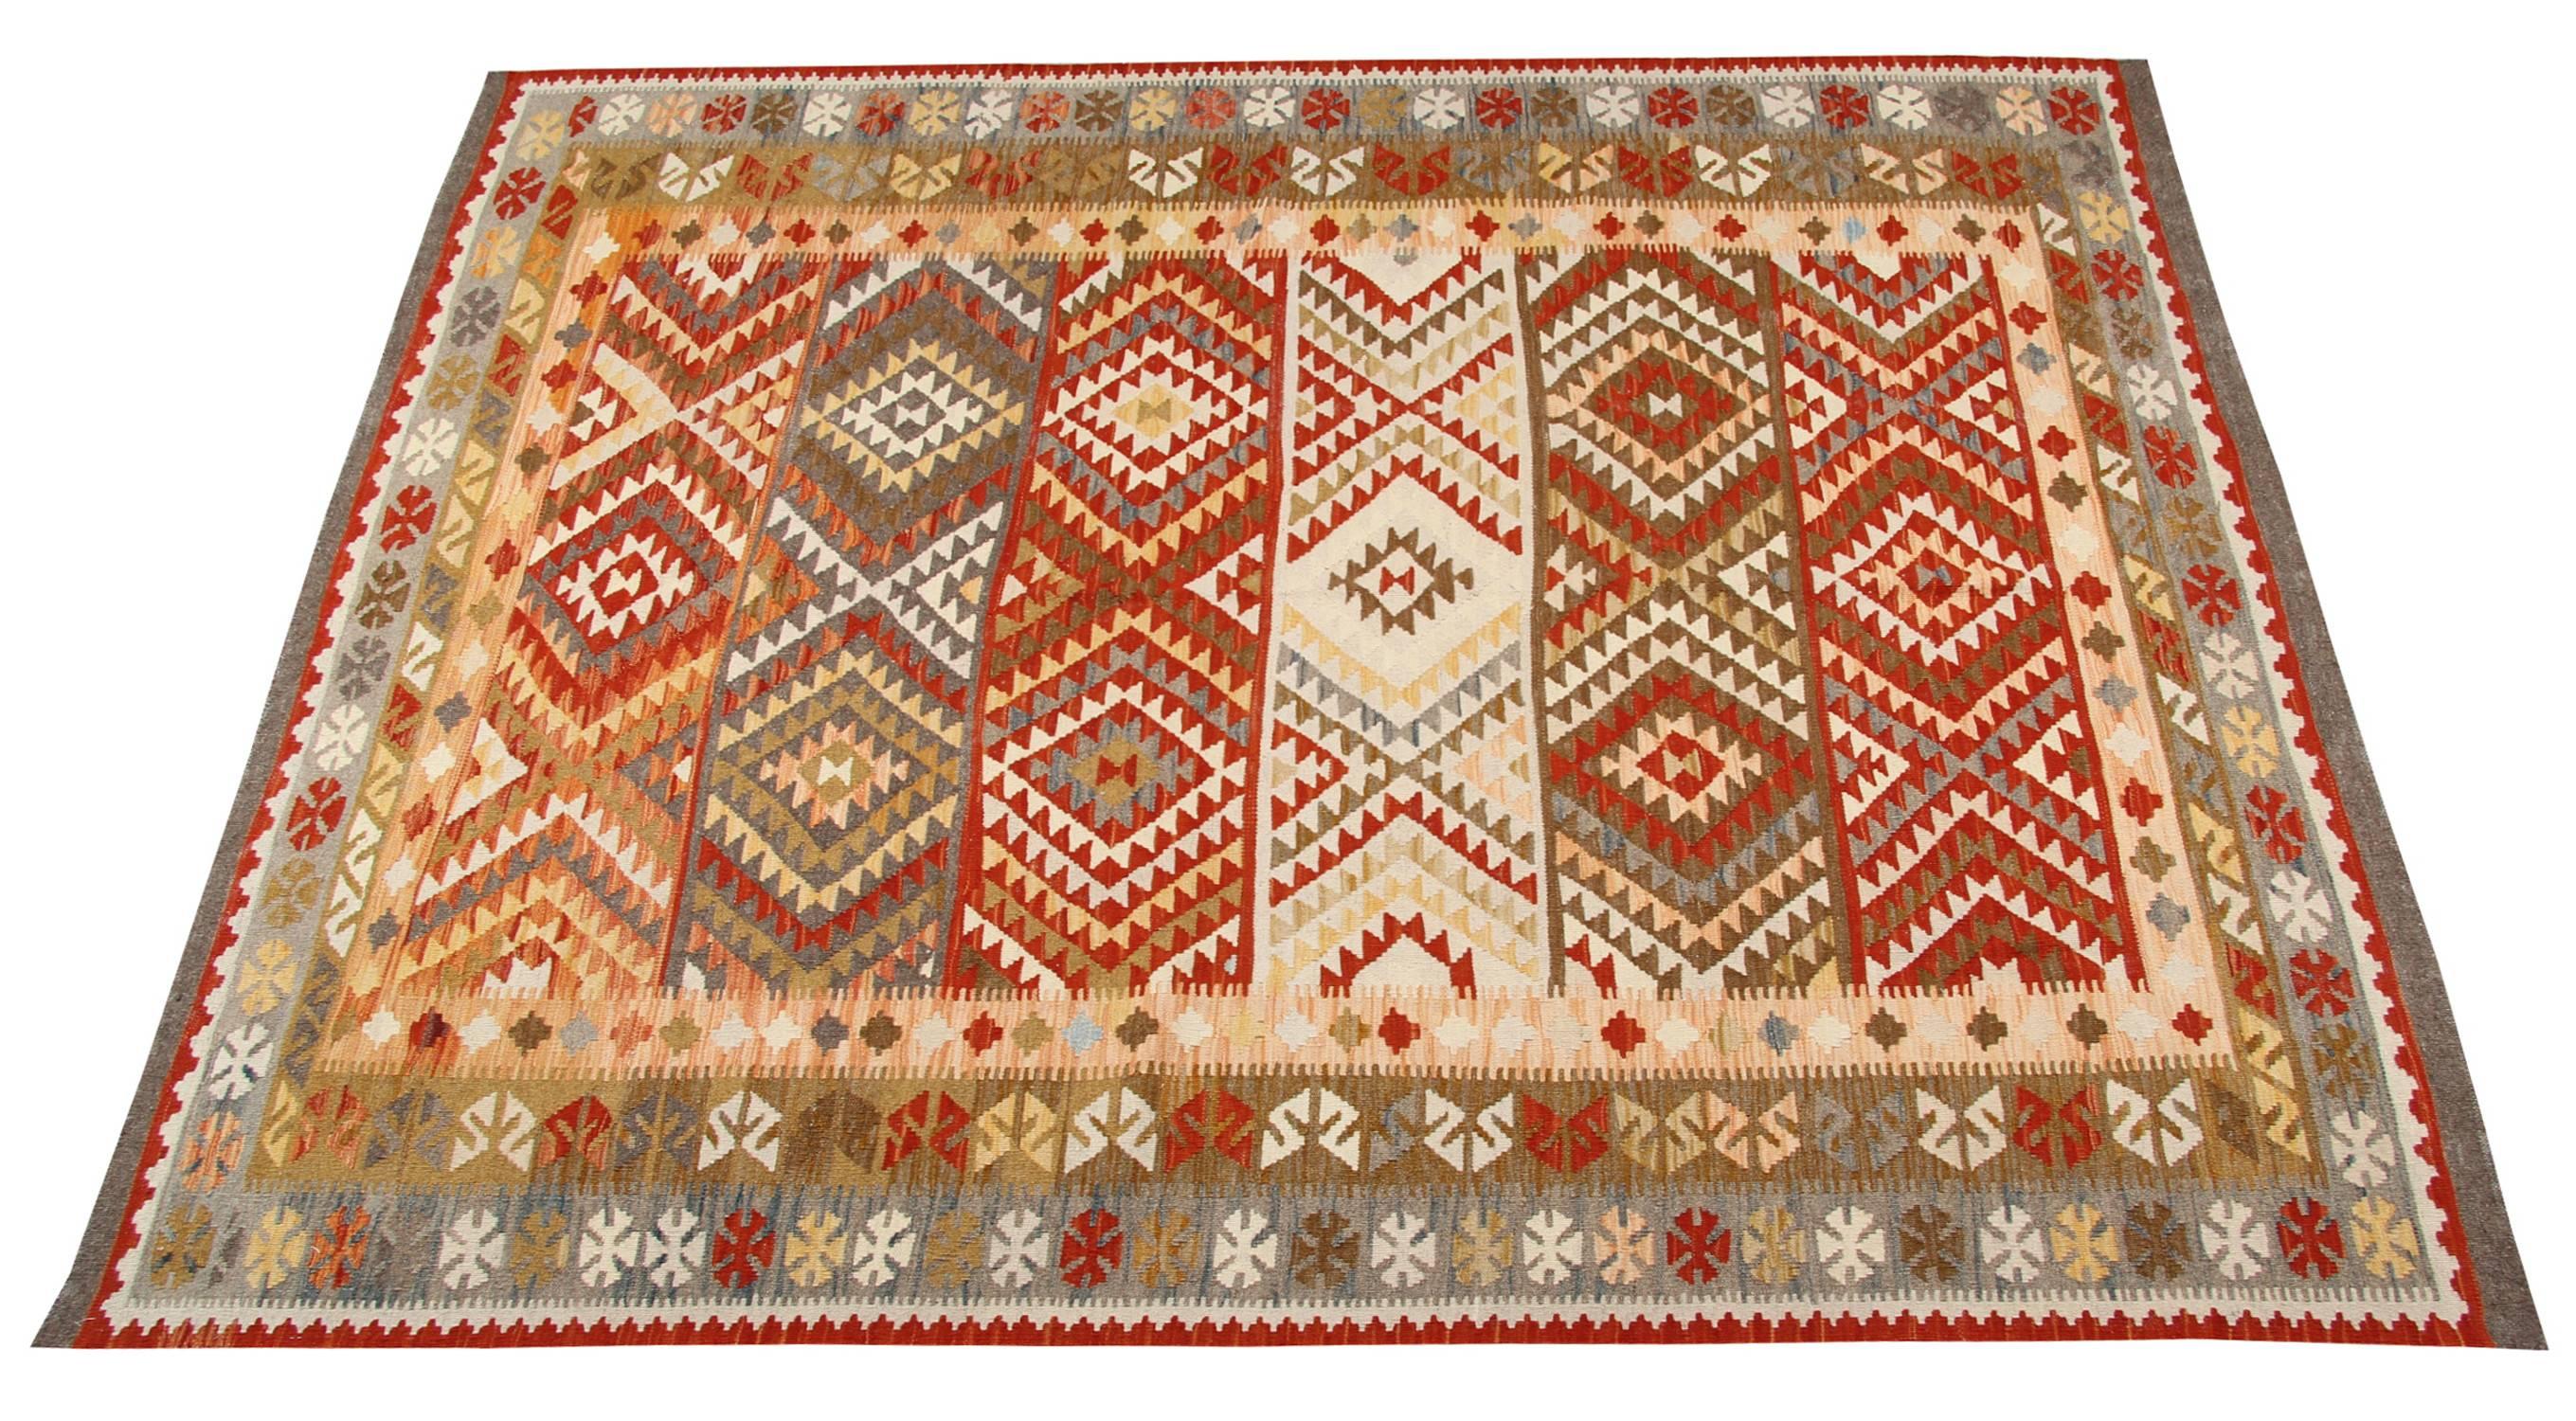 The original Kilim rug shown is mainly red, dark grey, light yellow and olive green. And the geometric patterns are symmetrical and pleasant. In reality, the design is composed of the symbols inspired by Persian Quasgai rugs. Particularly the